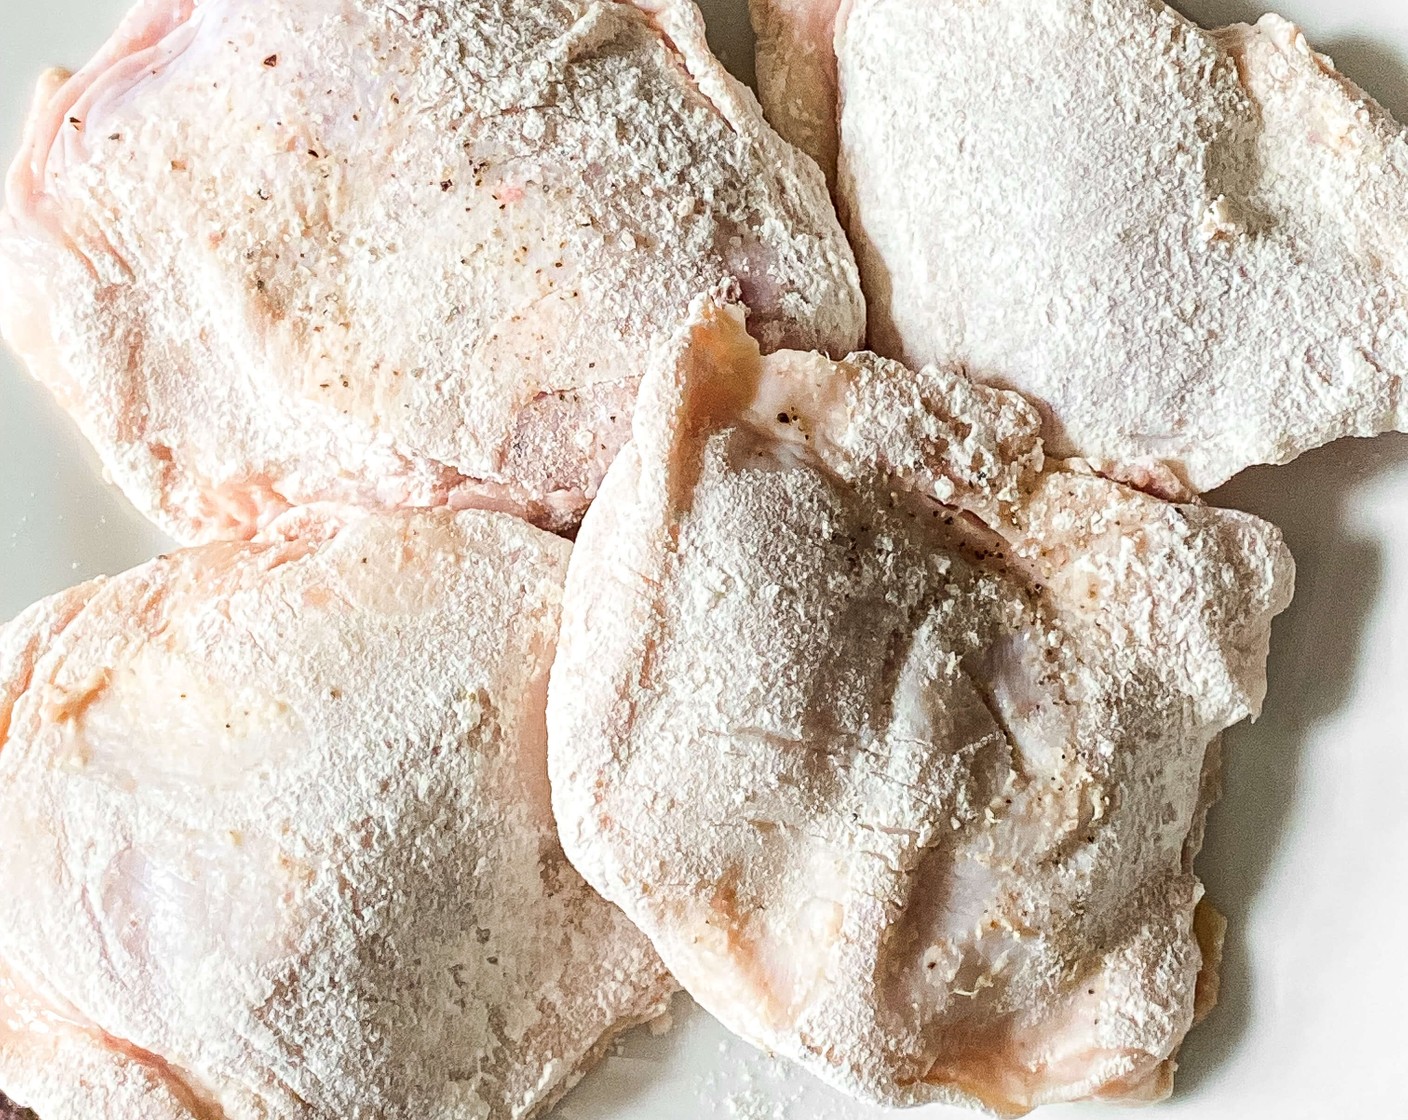 step 1 Season Bone-in, Skin-on Chicken Thighs (1.5 lb) with Salt (to taste), and Ground Black Pepper (to taste). Add All-Purpose Flour (1/2 cup) to a small bowl and dip chicken thighs in to coat with flour. Shake off excess flour.